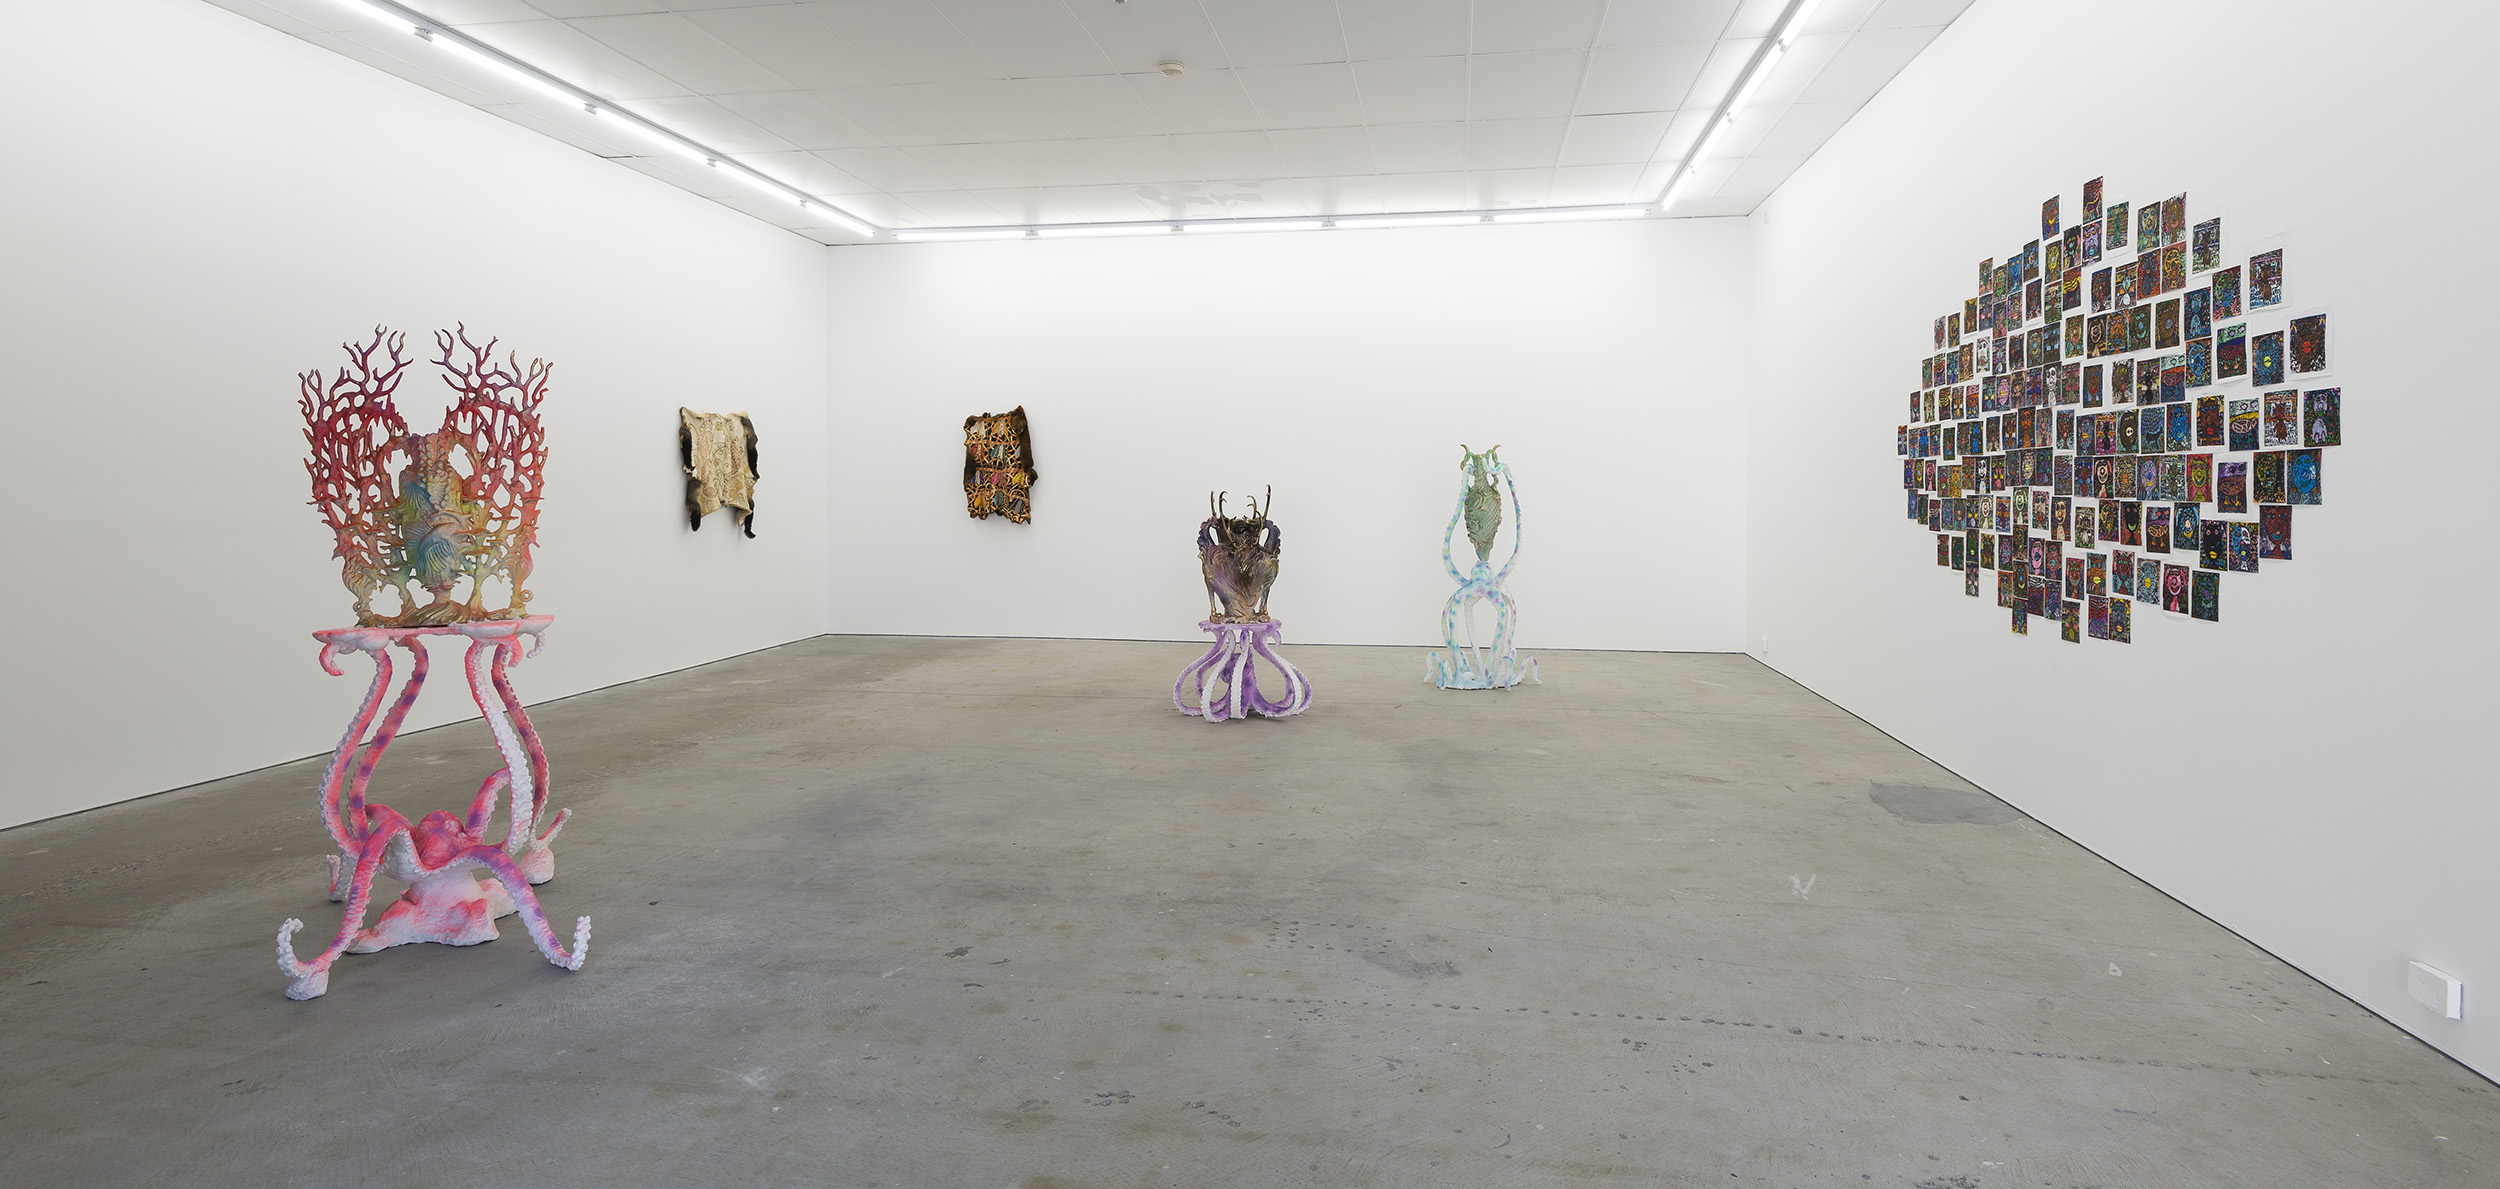 Installation view of Octopus 22: Baroquetopus curated by Tessa Laird, featuring work by Gina Bundle, Kate Rohde and Ivor Cantrill, presented at Gertrude Contemporary 2022. Photo: Christian Capurro. 